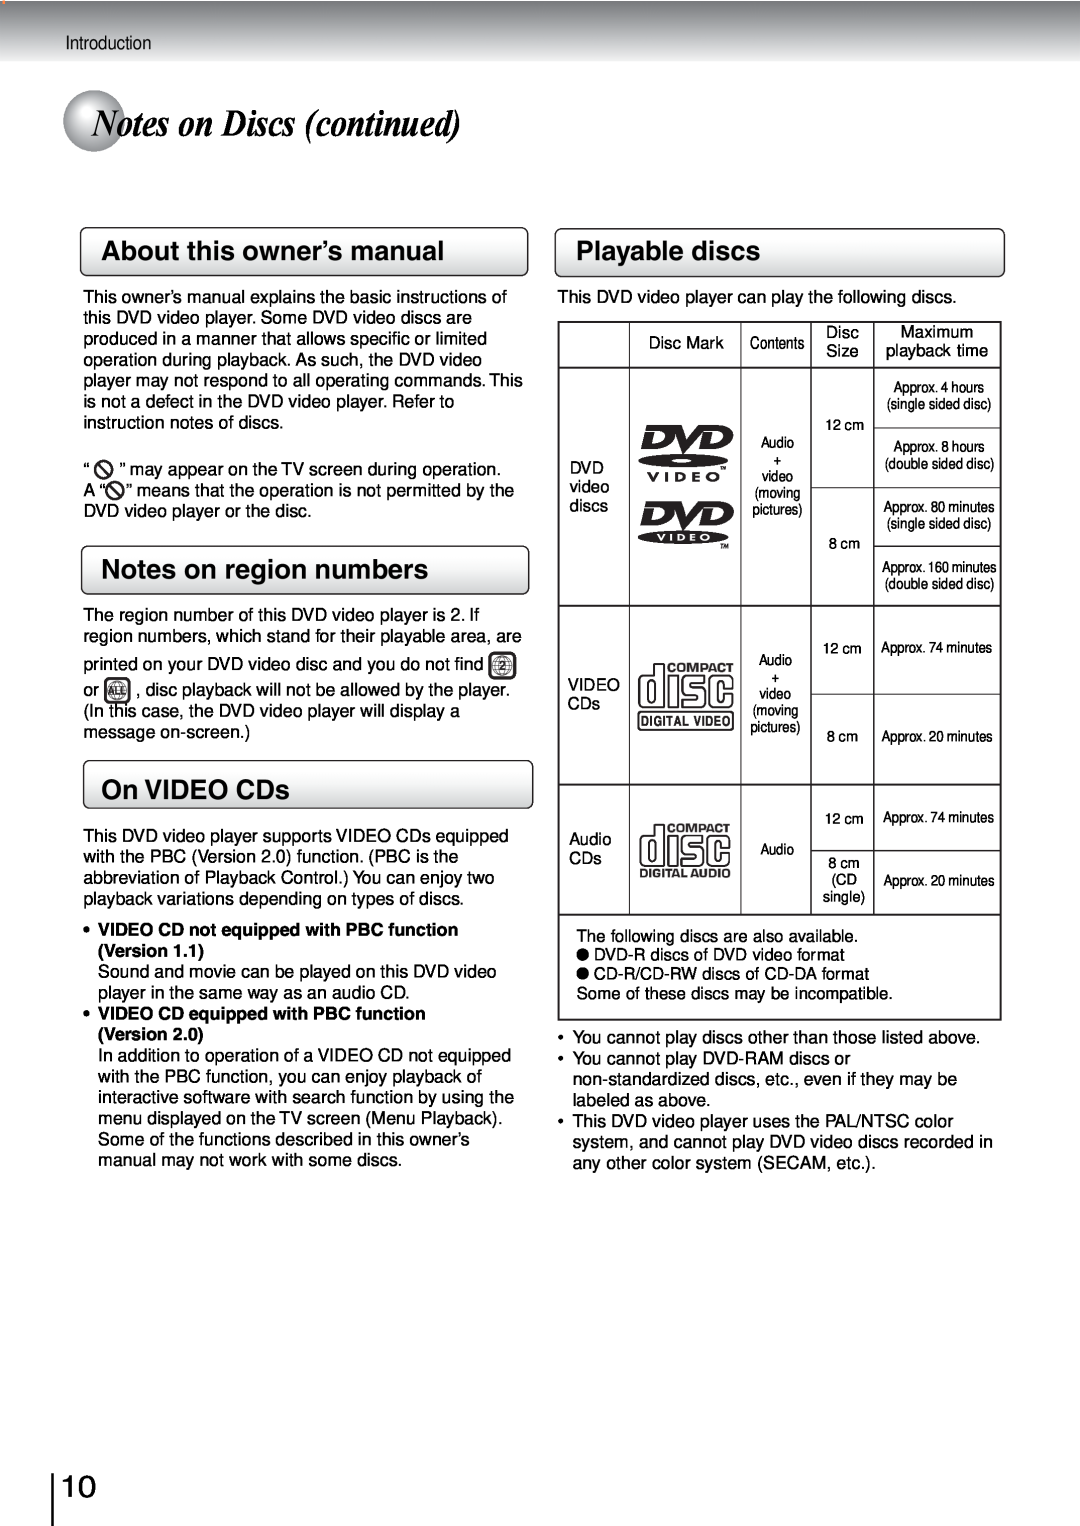 Toshiba SD-240ESB, SD-240ESE Notes on Discs continued, About this owner’s manual, Notes on region numbers, On VIDEO CDs 